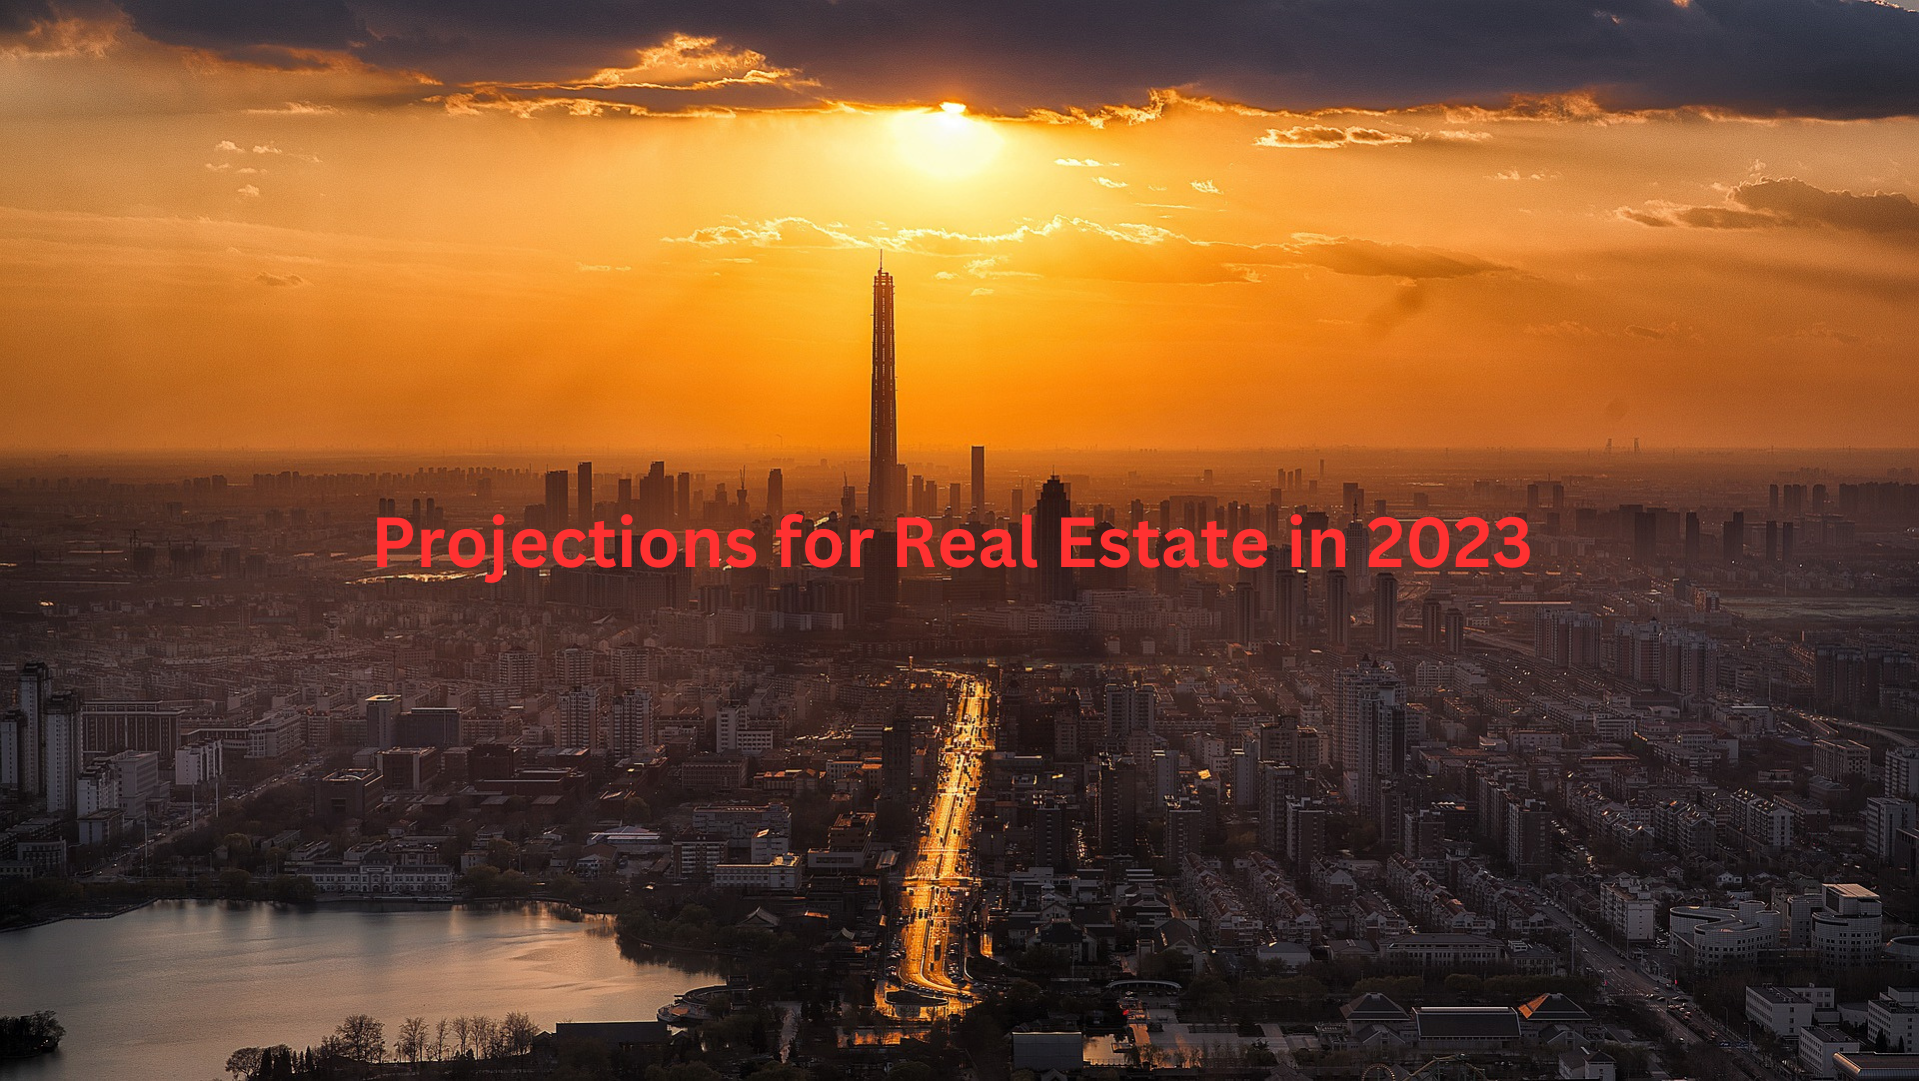 Projections for Real Estate in 2023